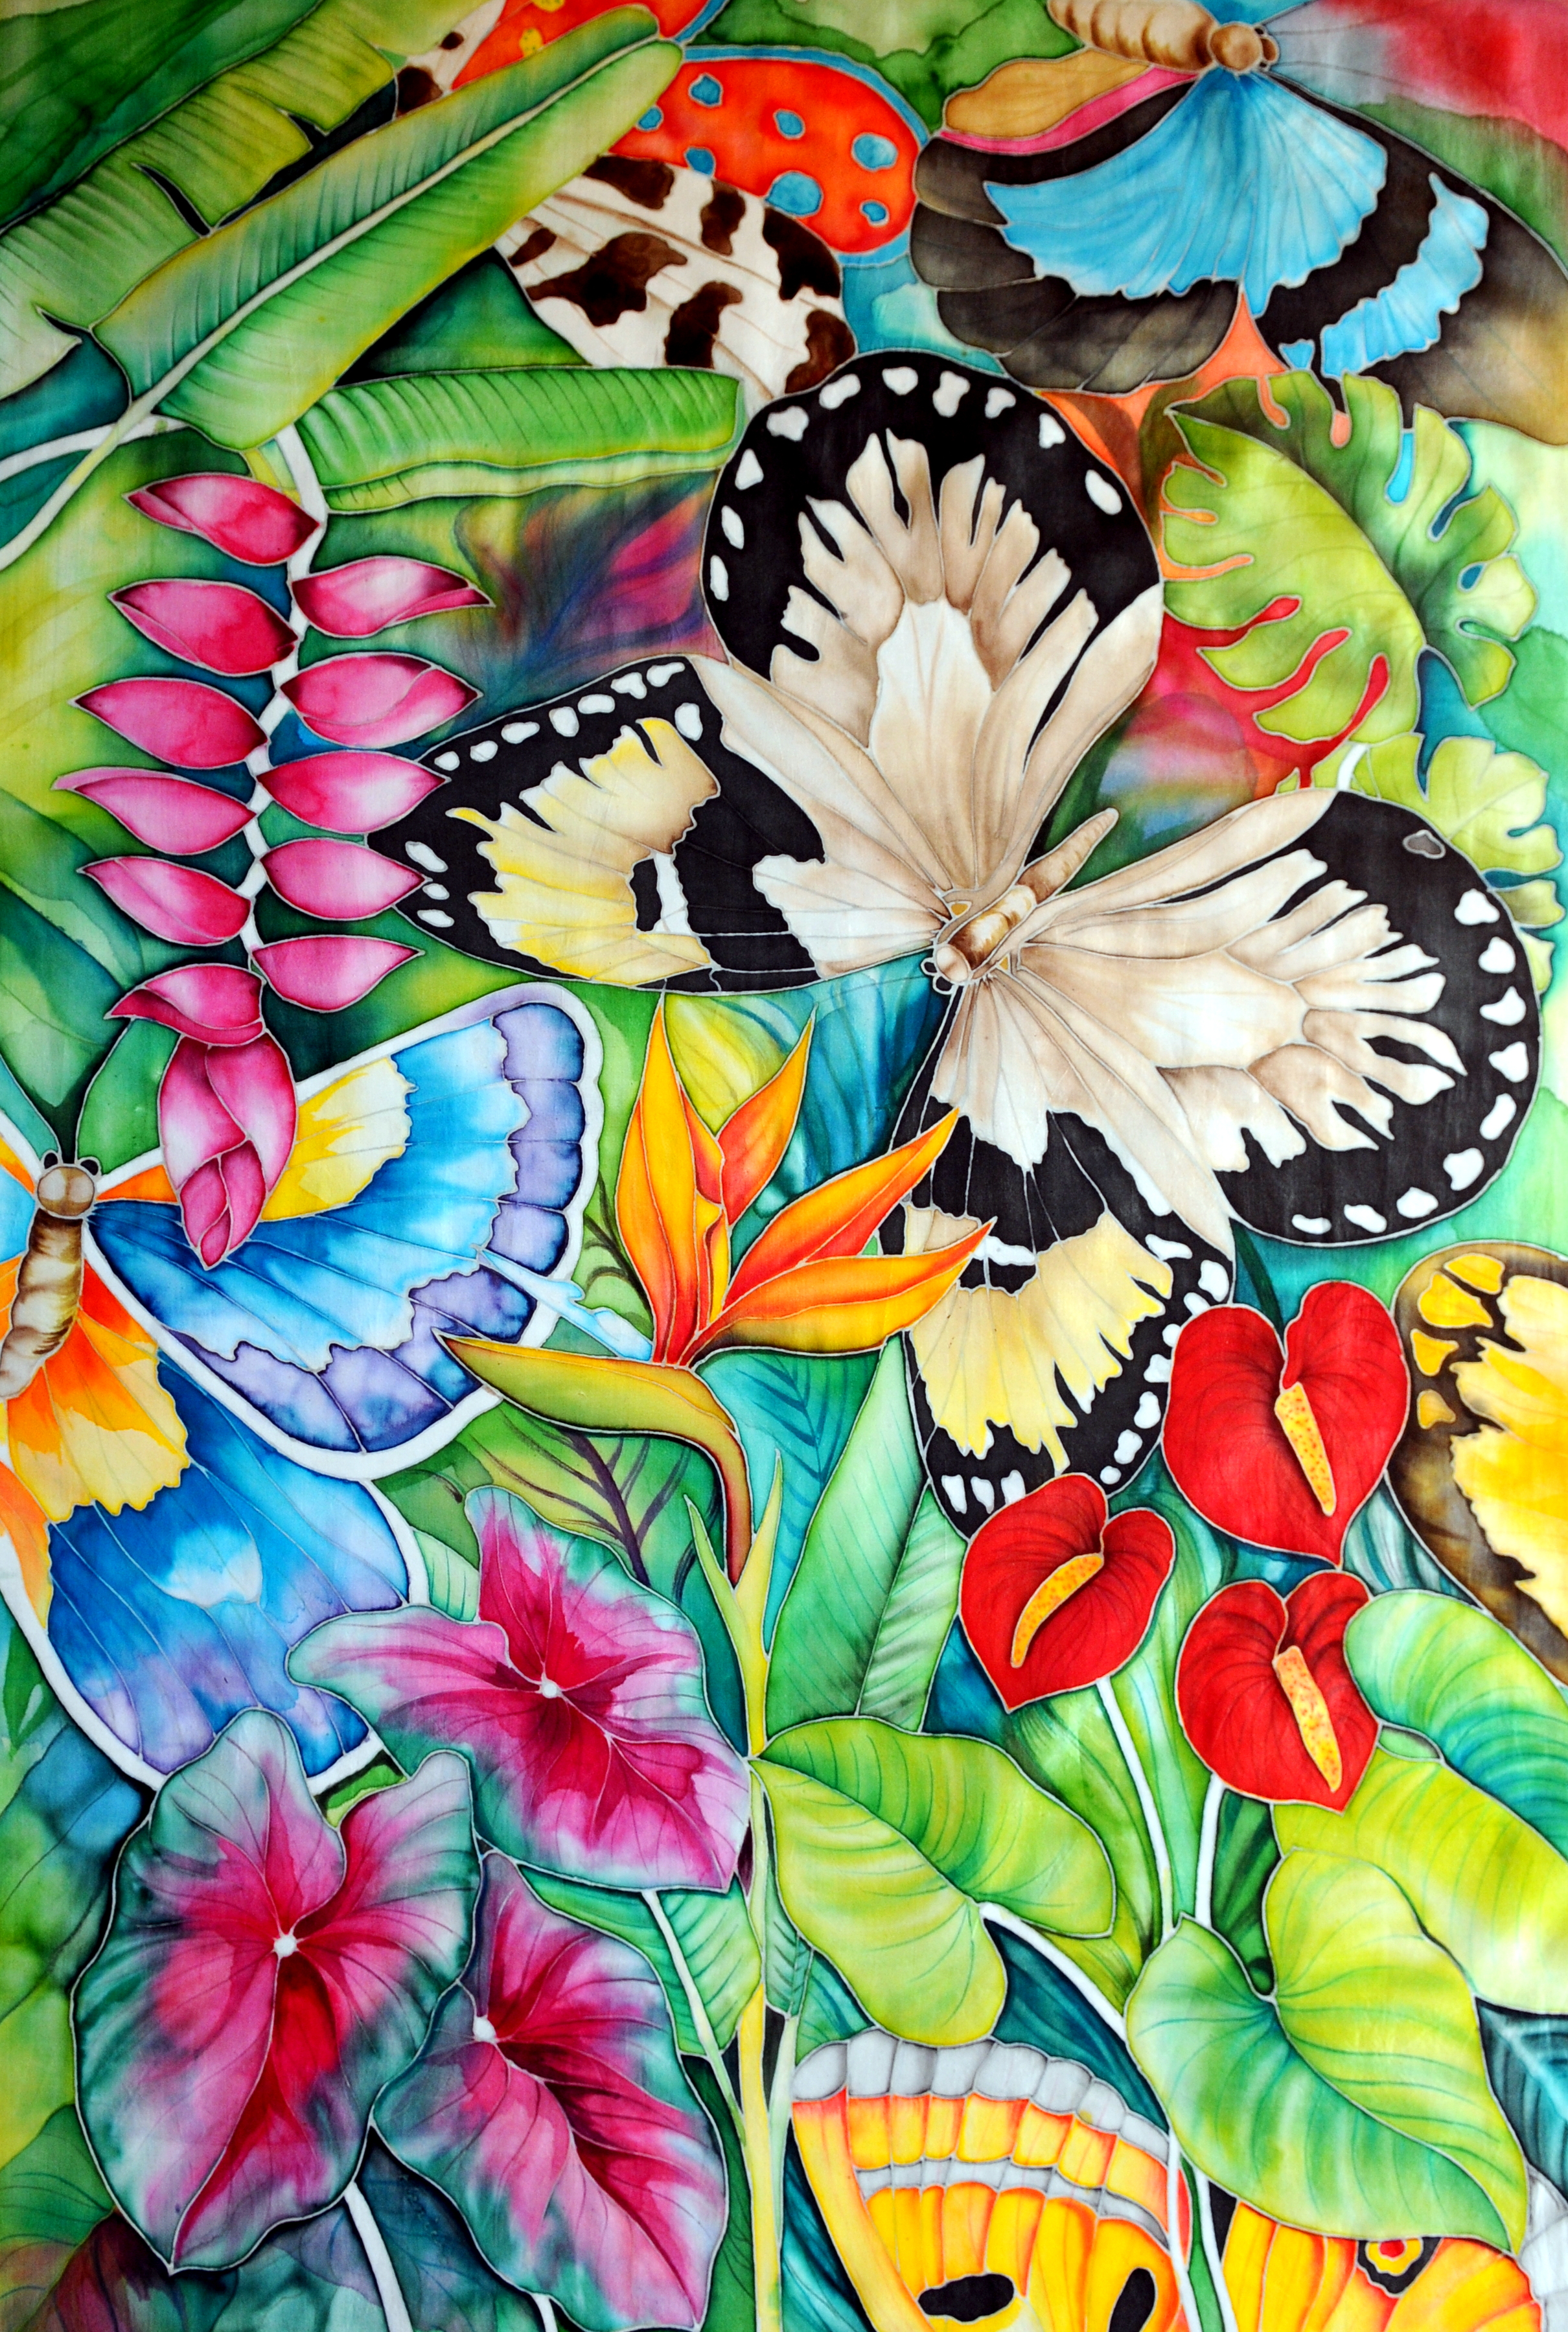 3 Butterflies and tropical forest (20X30)